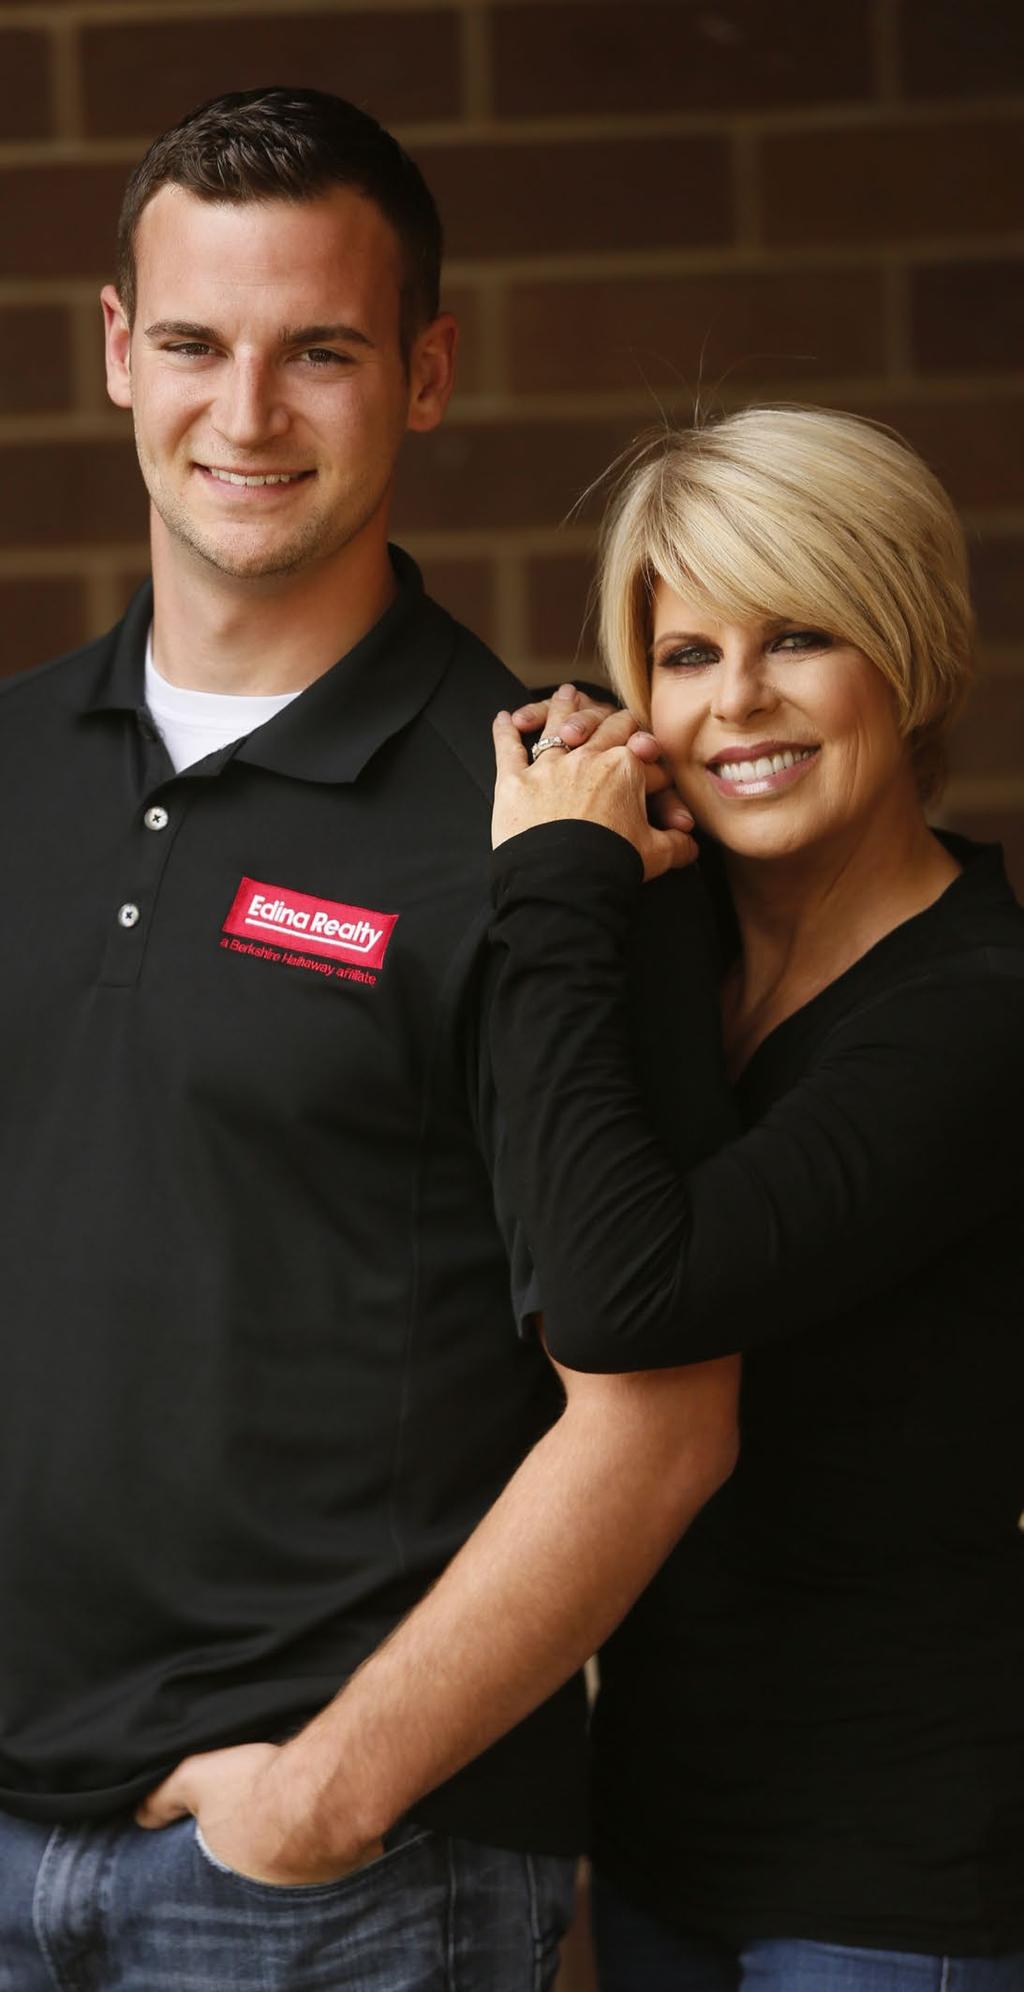 Realtor Broker- Associate of Team Johnson Real Estate Specialists Edina Realty in Hudson, Wisconsin, Nanci Johnson, and her son serve the Western Wisconsin and Eastern Minnesota areas.